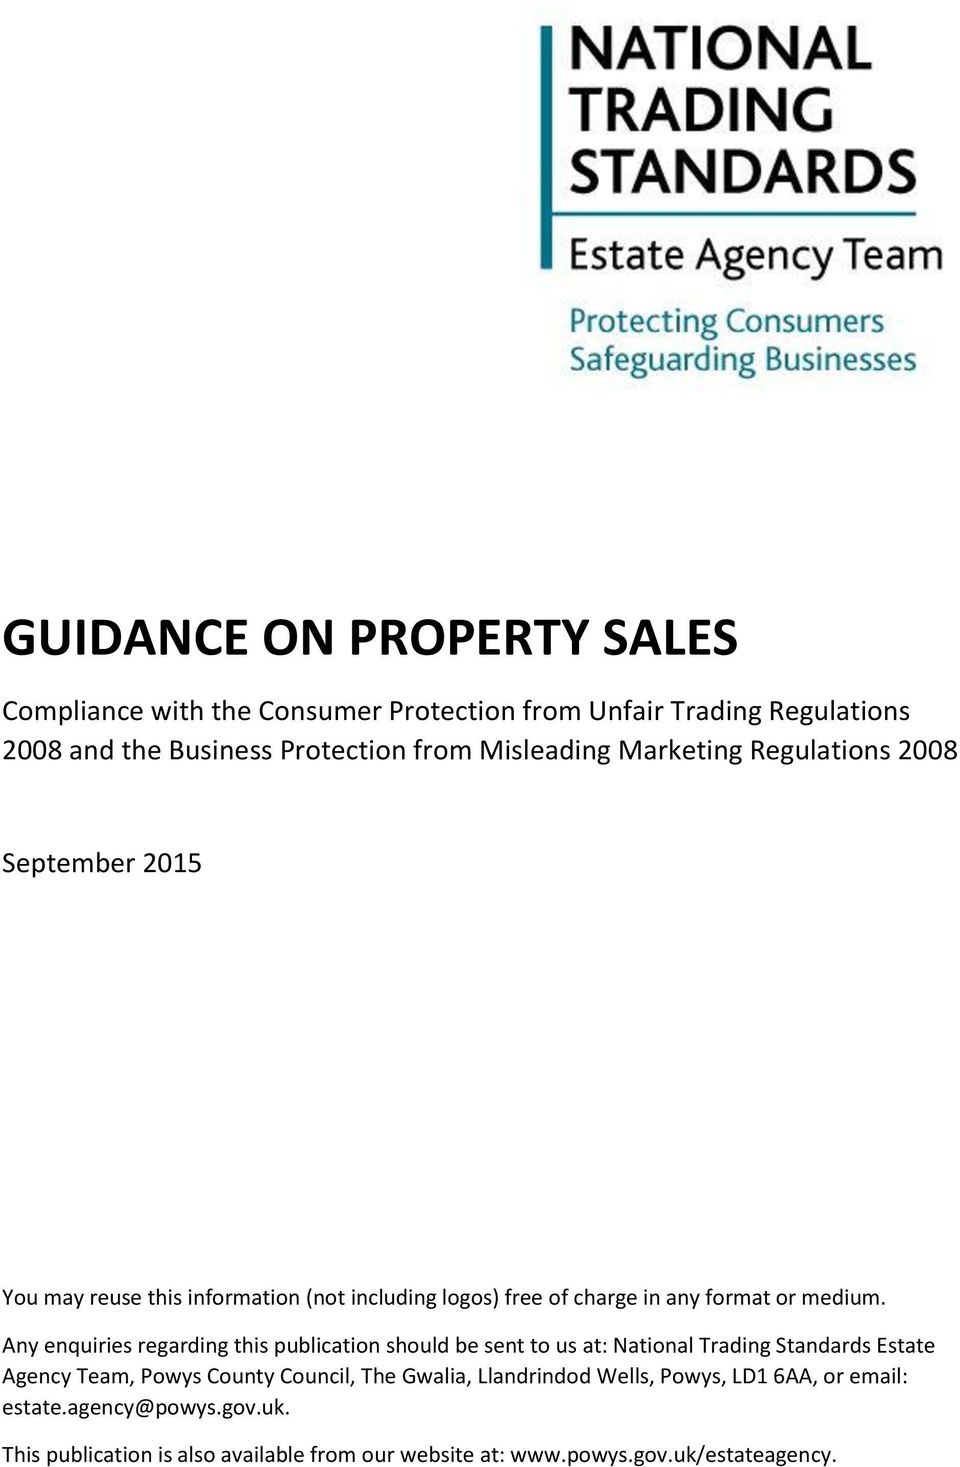 Any enquiries regarding this publication should be sent to us at: National Trading Standards Estate Agency Team, Powys County Council, The Gwalia,